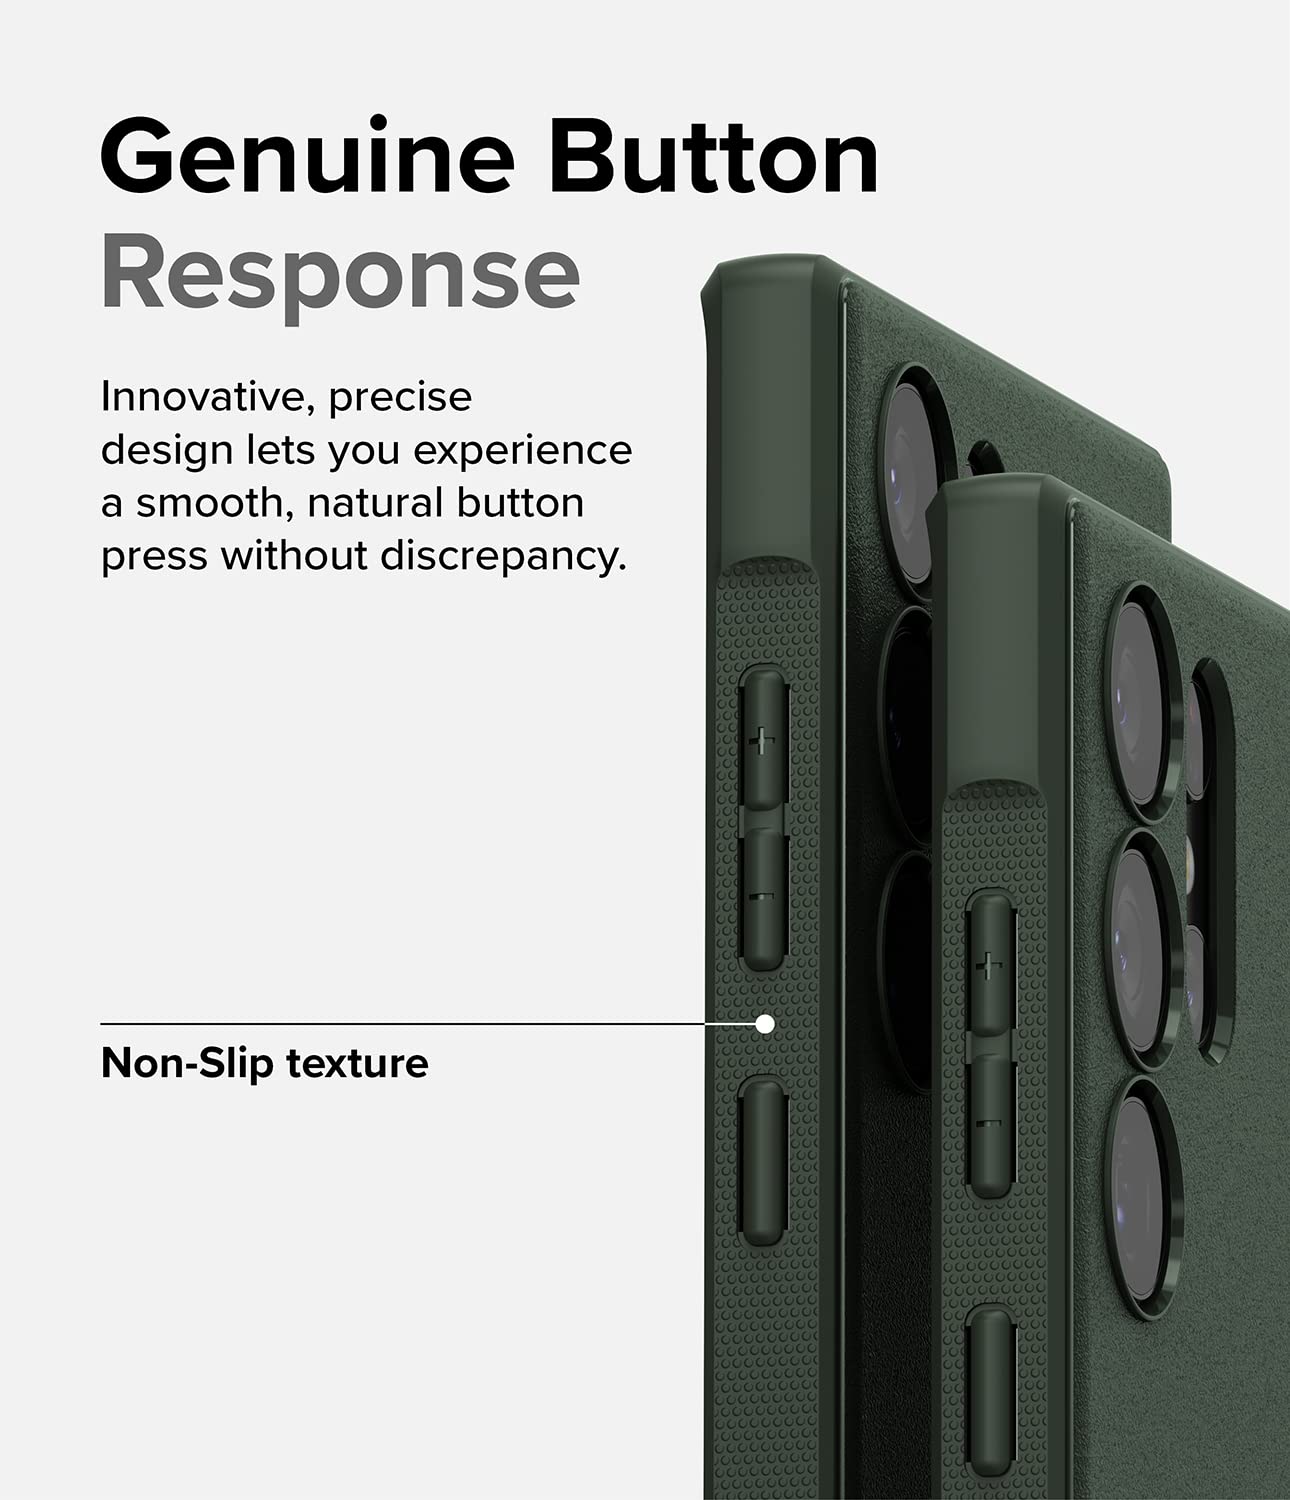 Ringke Onyx [Feels Good in The Hand] Compatible with Samsung Galaxy S23 Ultra Case 5G, Anti-Fingerprint Technology Non-Slip Enhanced Grip Smudge Proof Cover Designed for S23 Ultra Case - Dark Green